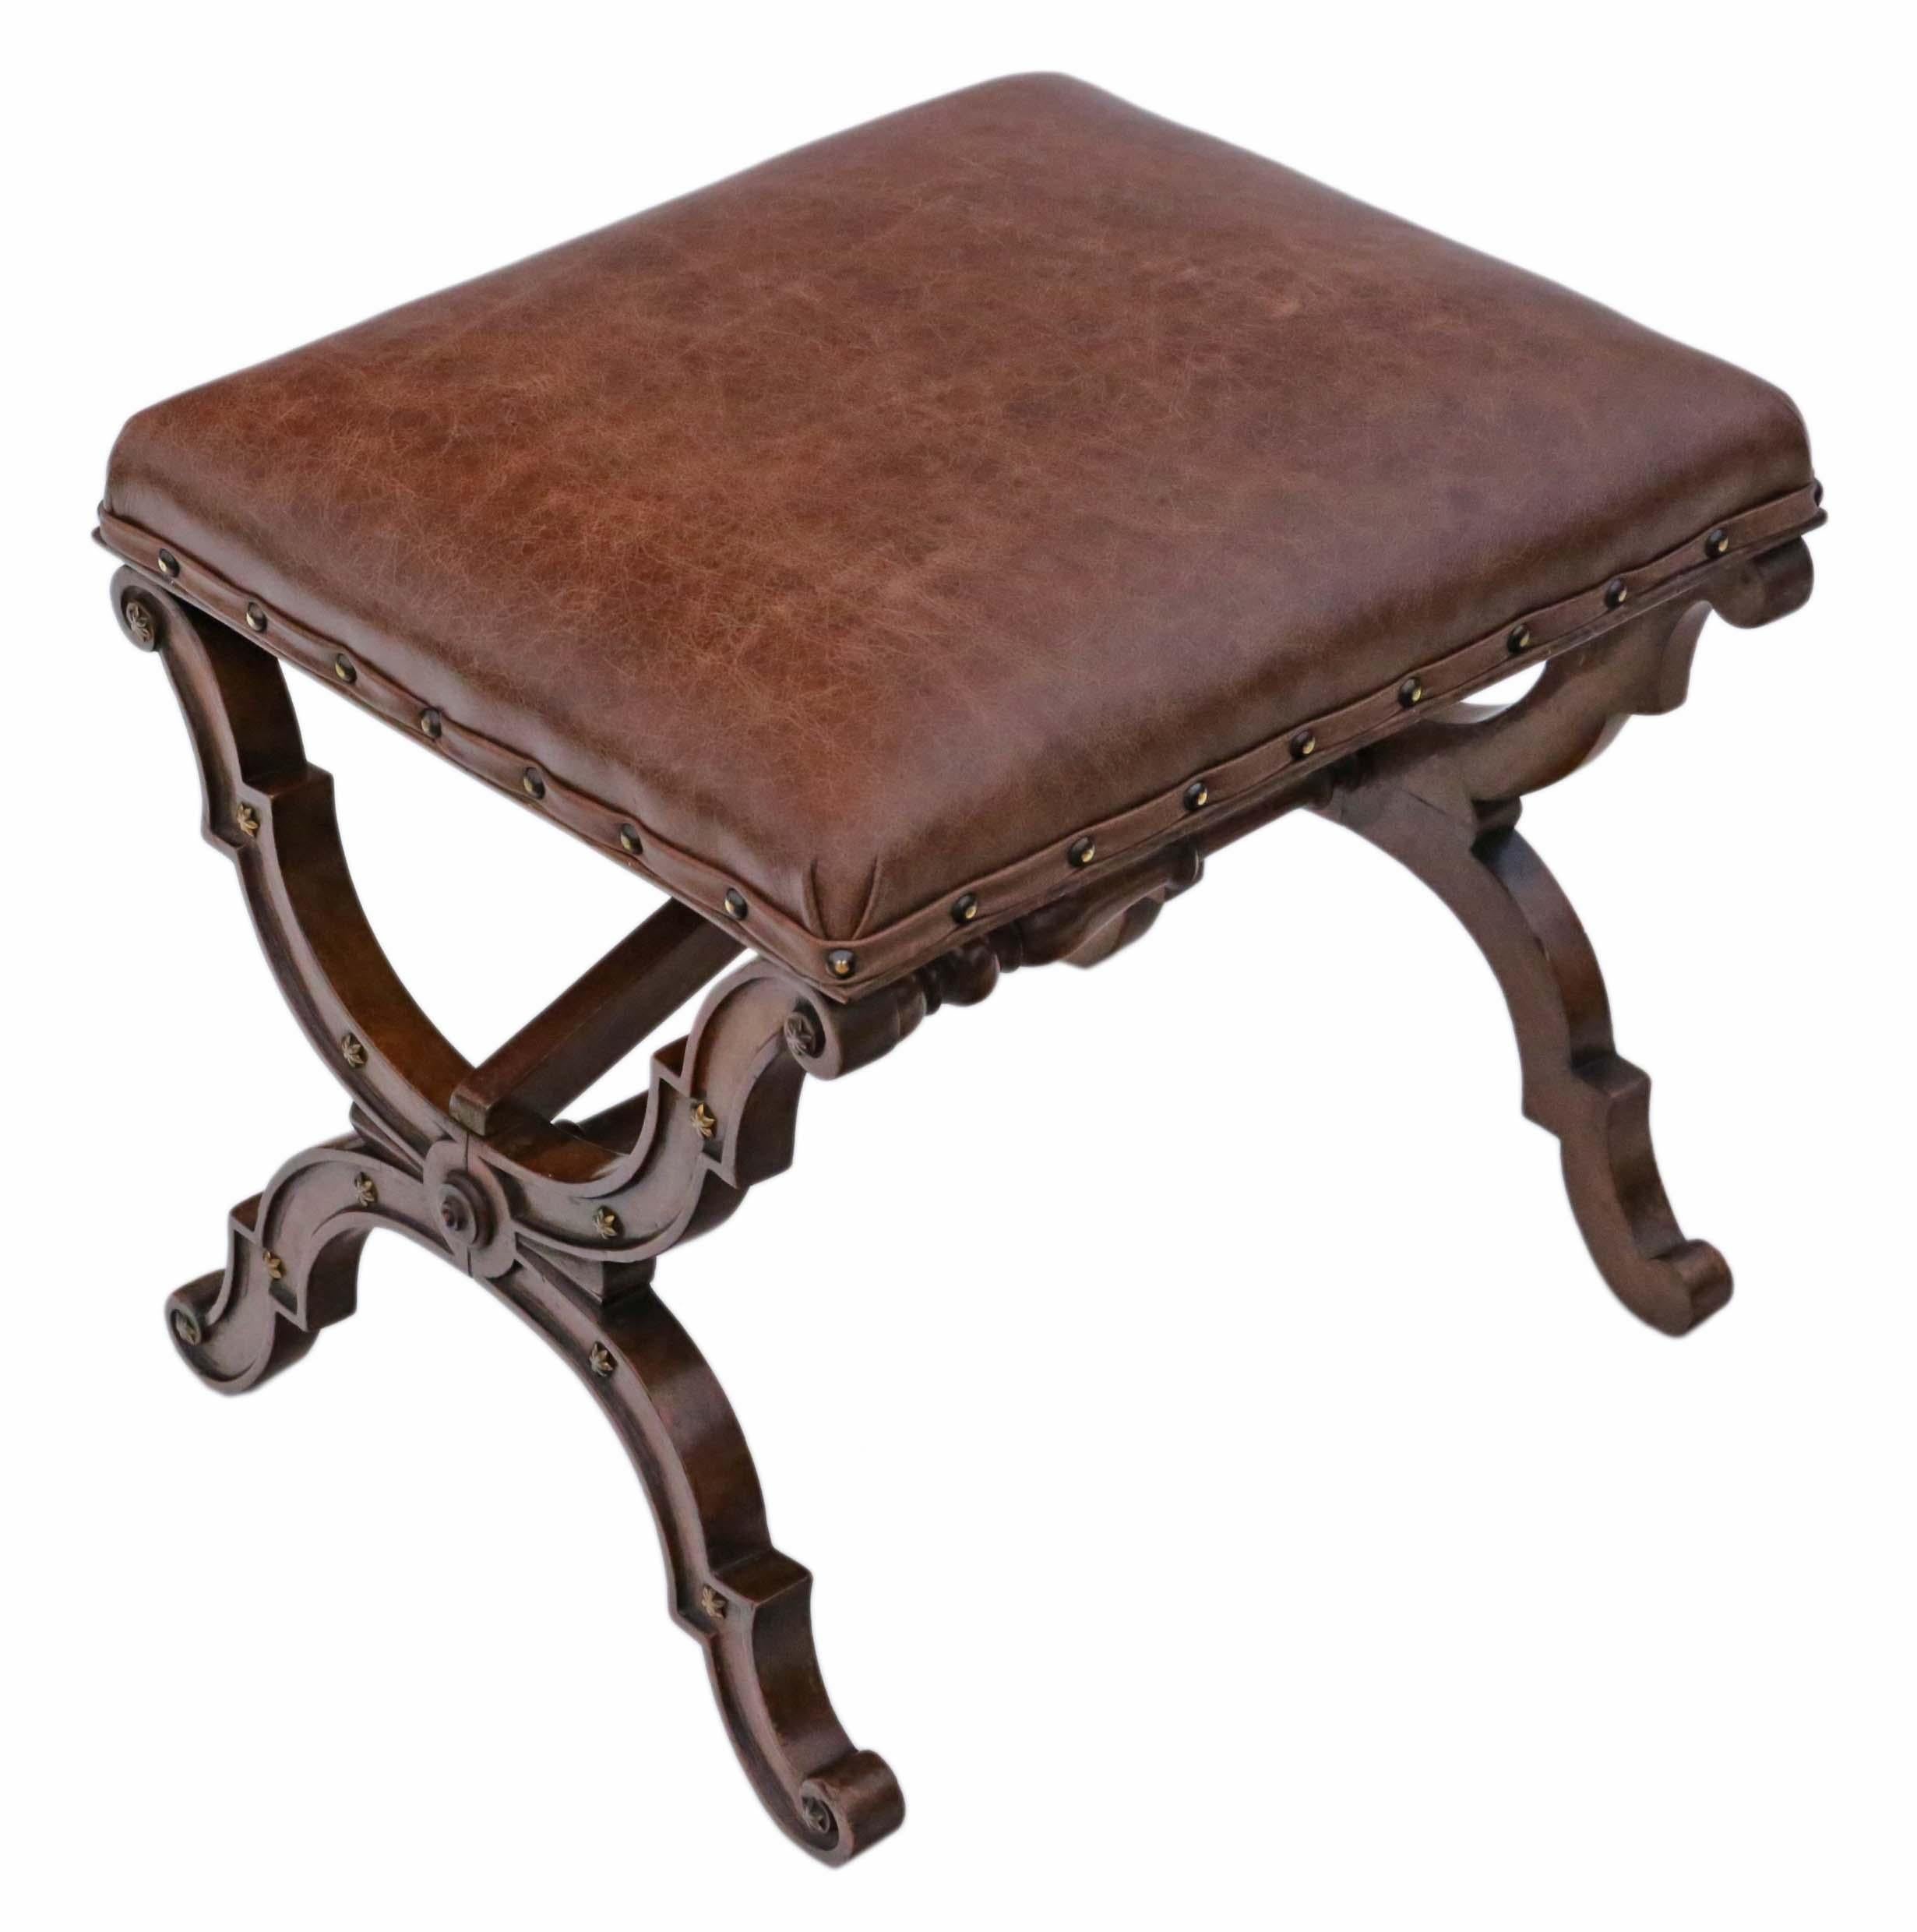 Antique rare quality Victorian walnut and leather X-frame stool.
Quality, decorative and attractive, strong with no loose joints or wobbles.
Would look amazing in the right location.
Amazing and very striking 'X-frame' base. A rare decorative